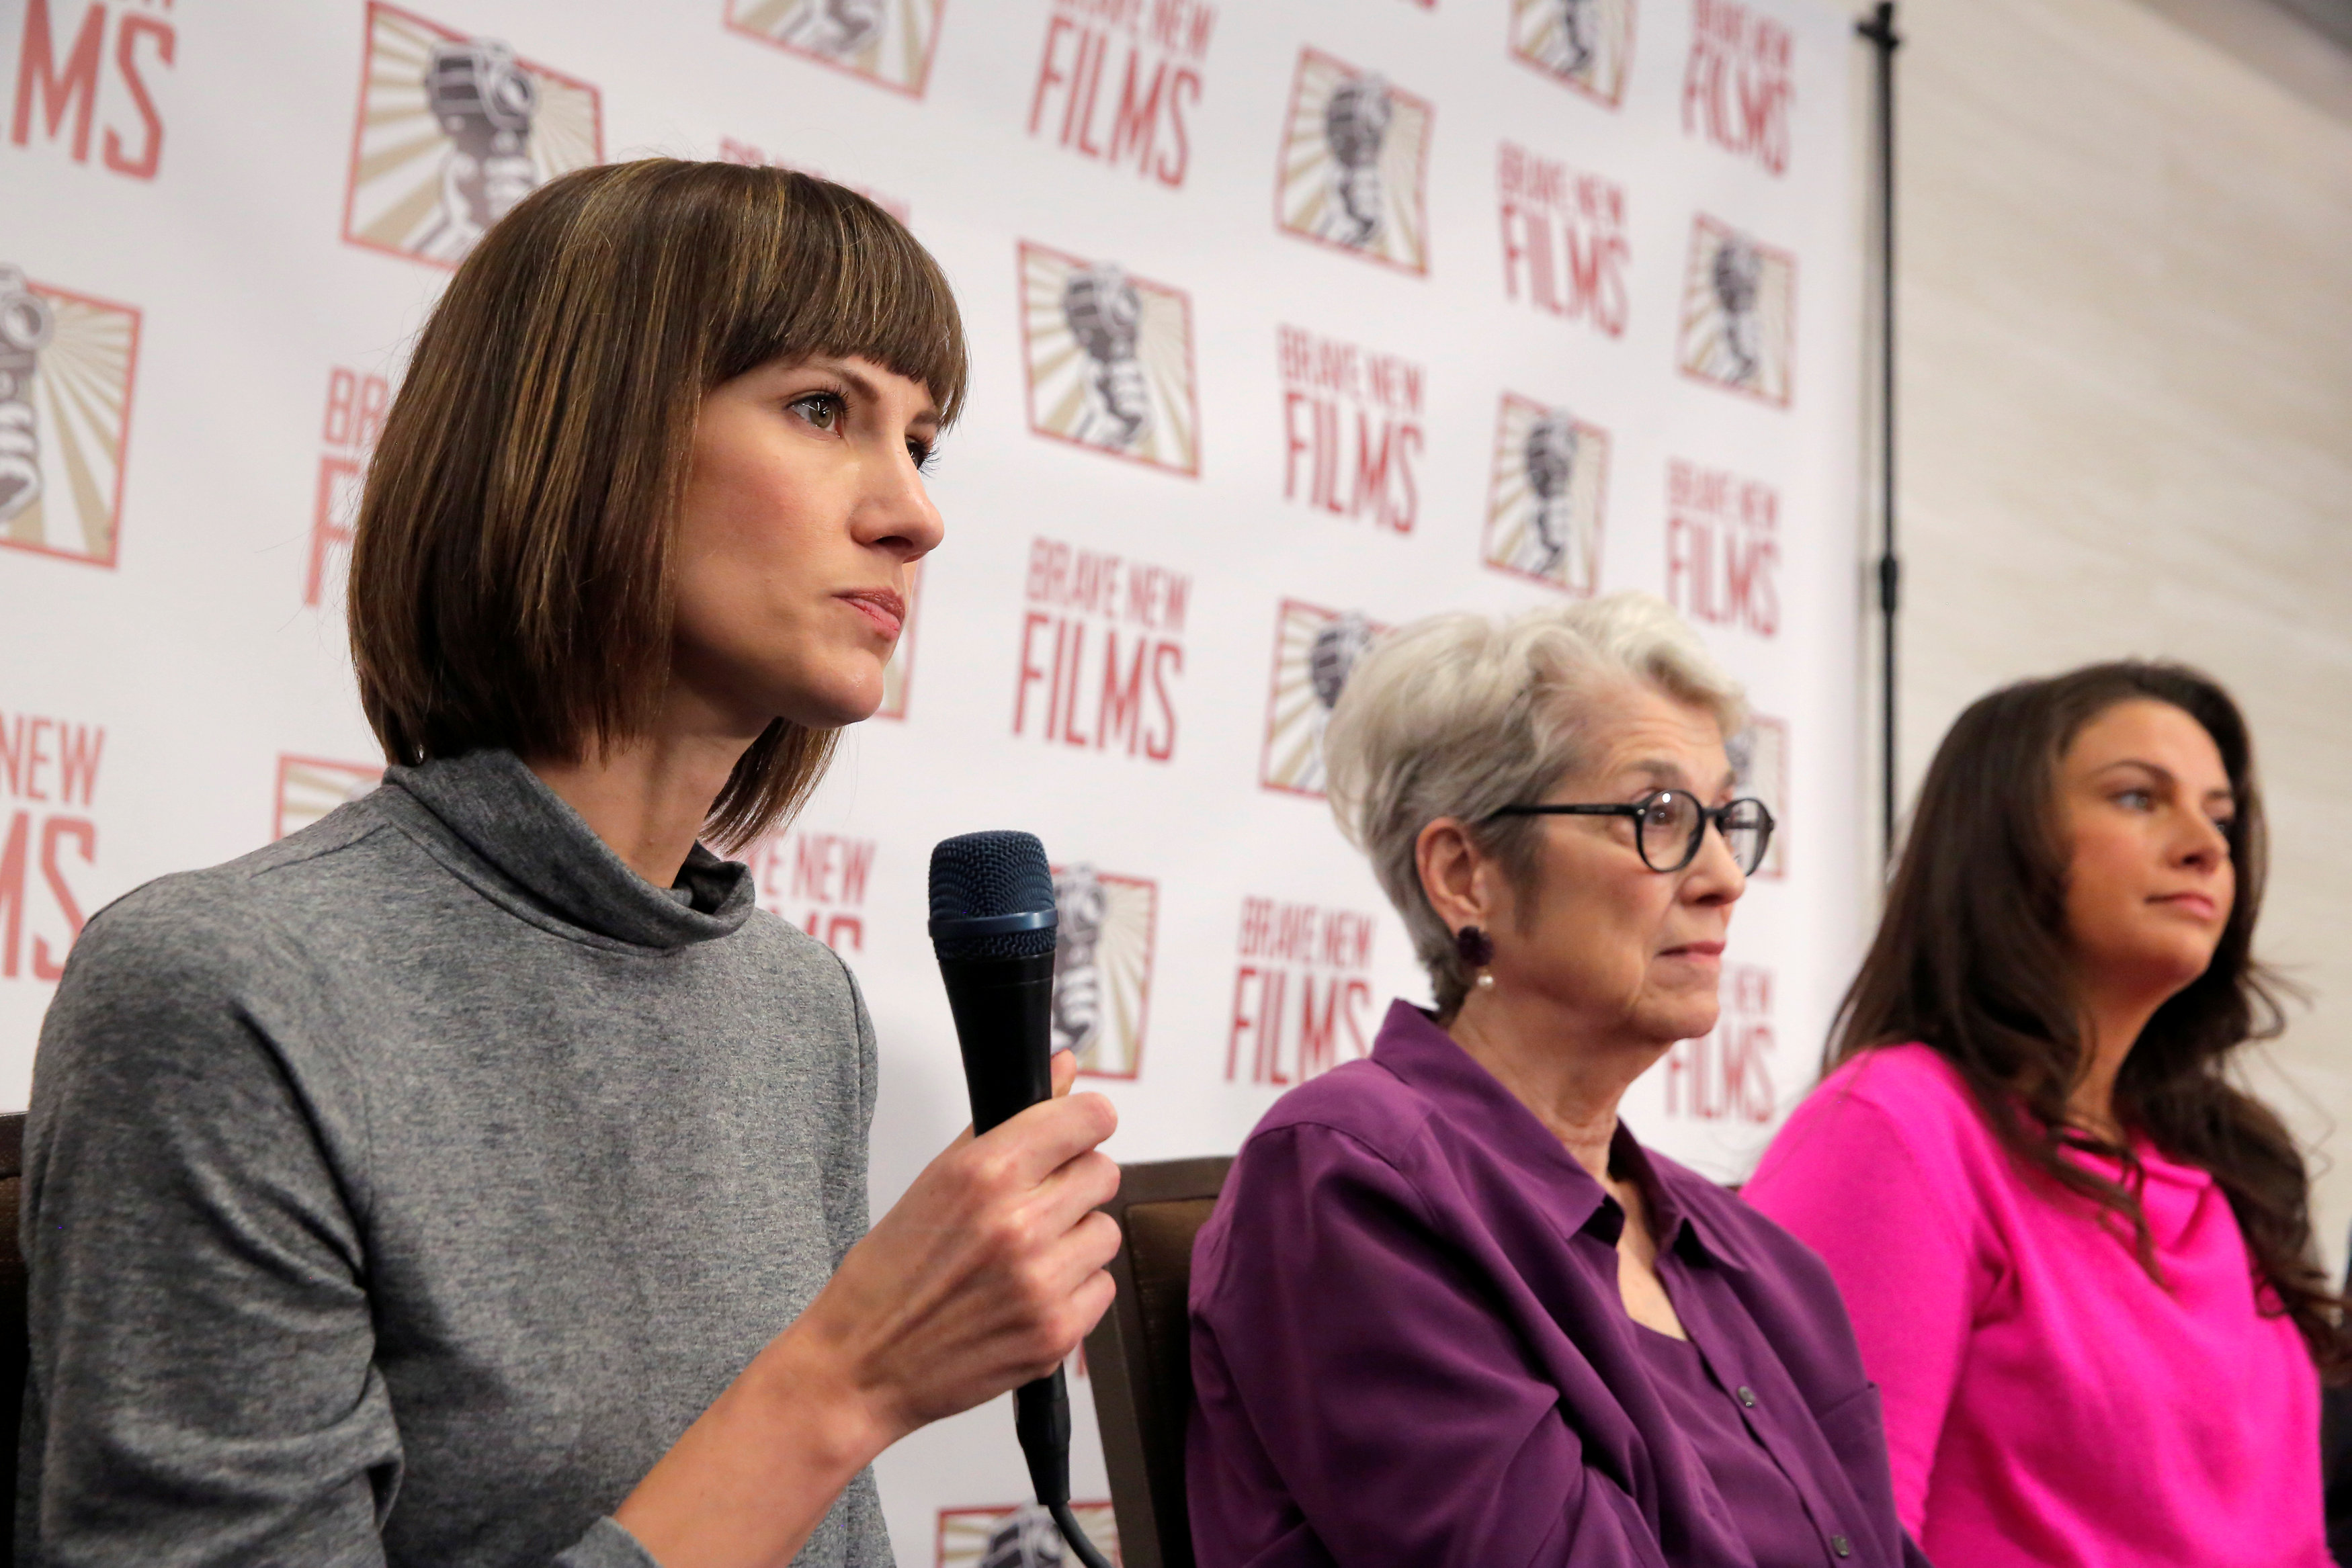 (From left) Rachel Crooks, Jessica Leeds and Samantha Holvey attend a news conference  in Manhattan, New York, December 11, 2017. u00e2u20acu201d Reuters pic